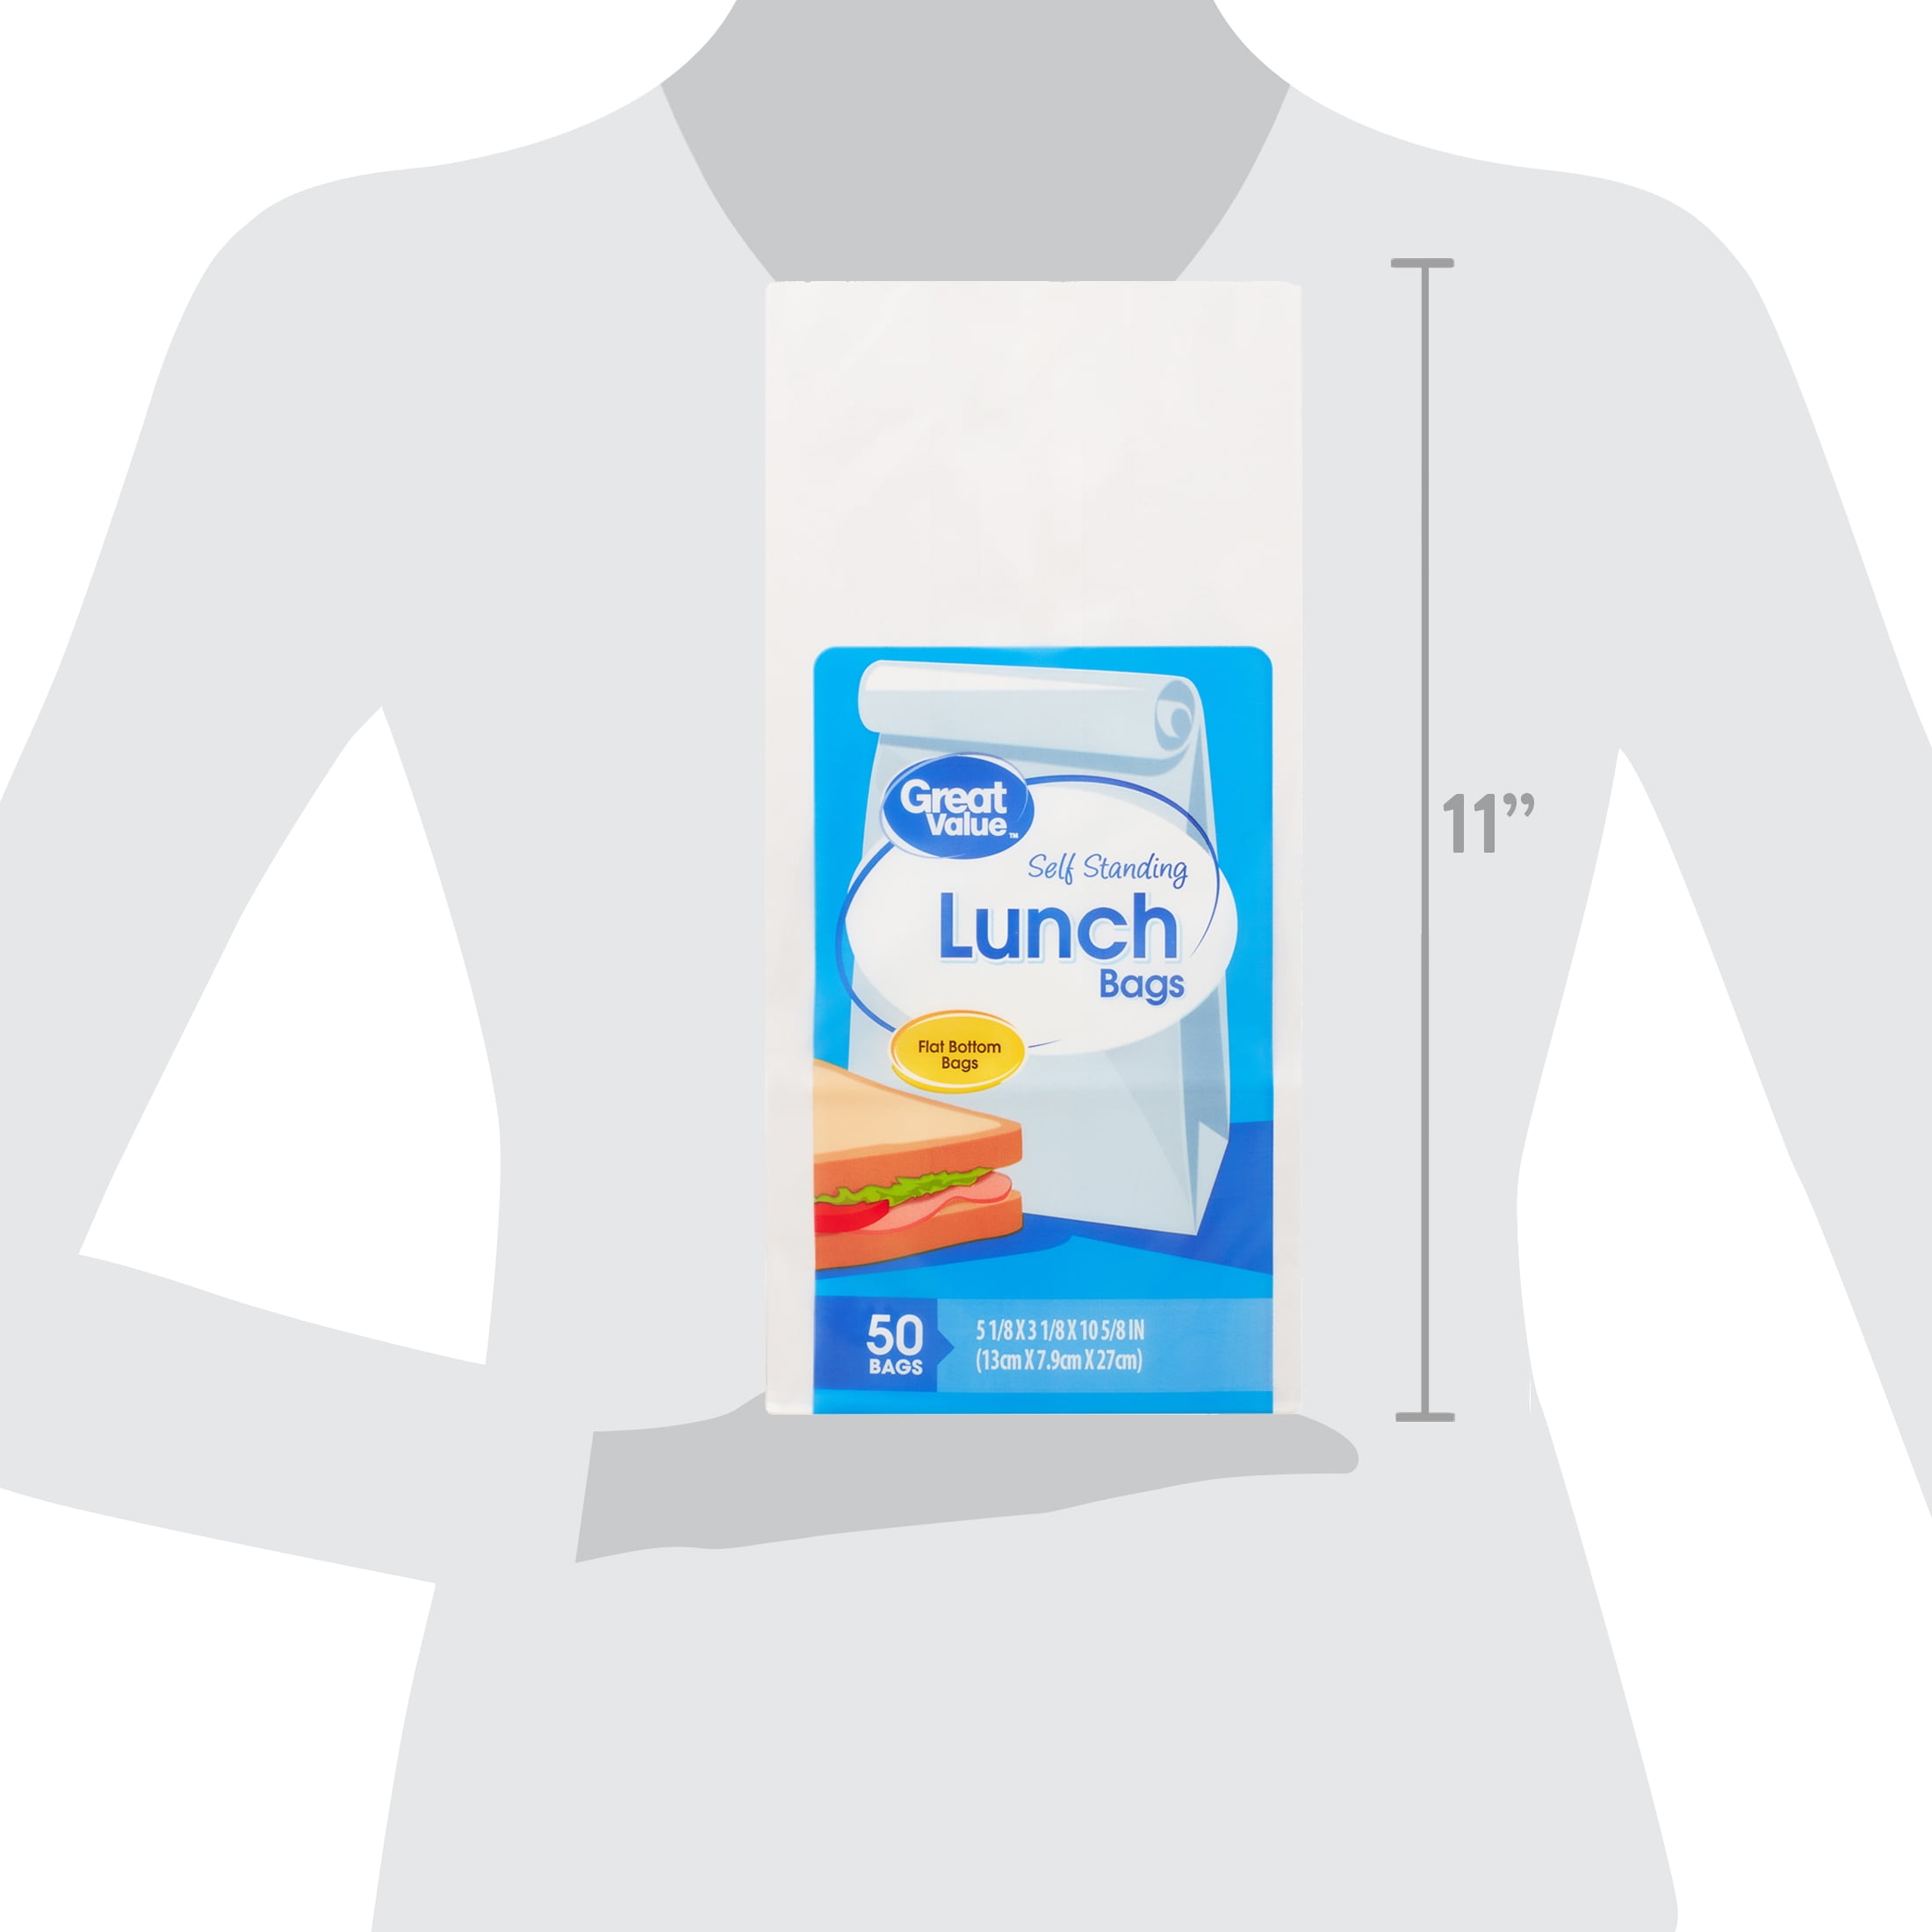  SOLAS White Paper Lunch Bags 50 Pack, White Paper Crafting Bags, Thick White Kraft Paper Bags, White Sandwich Paper Bags